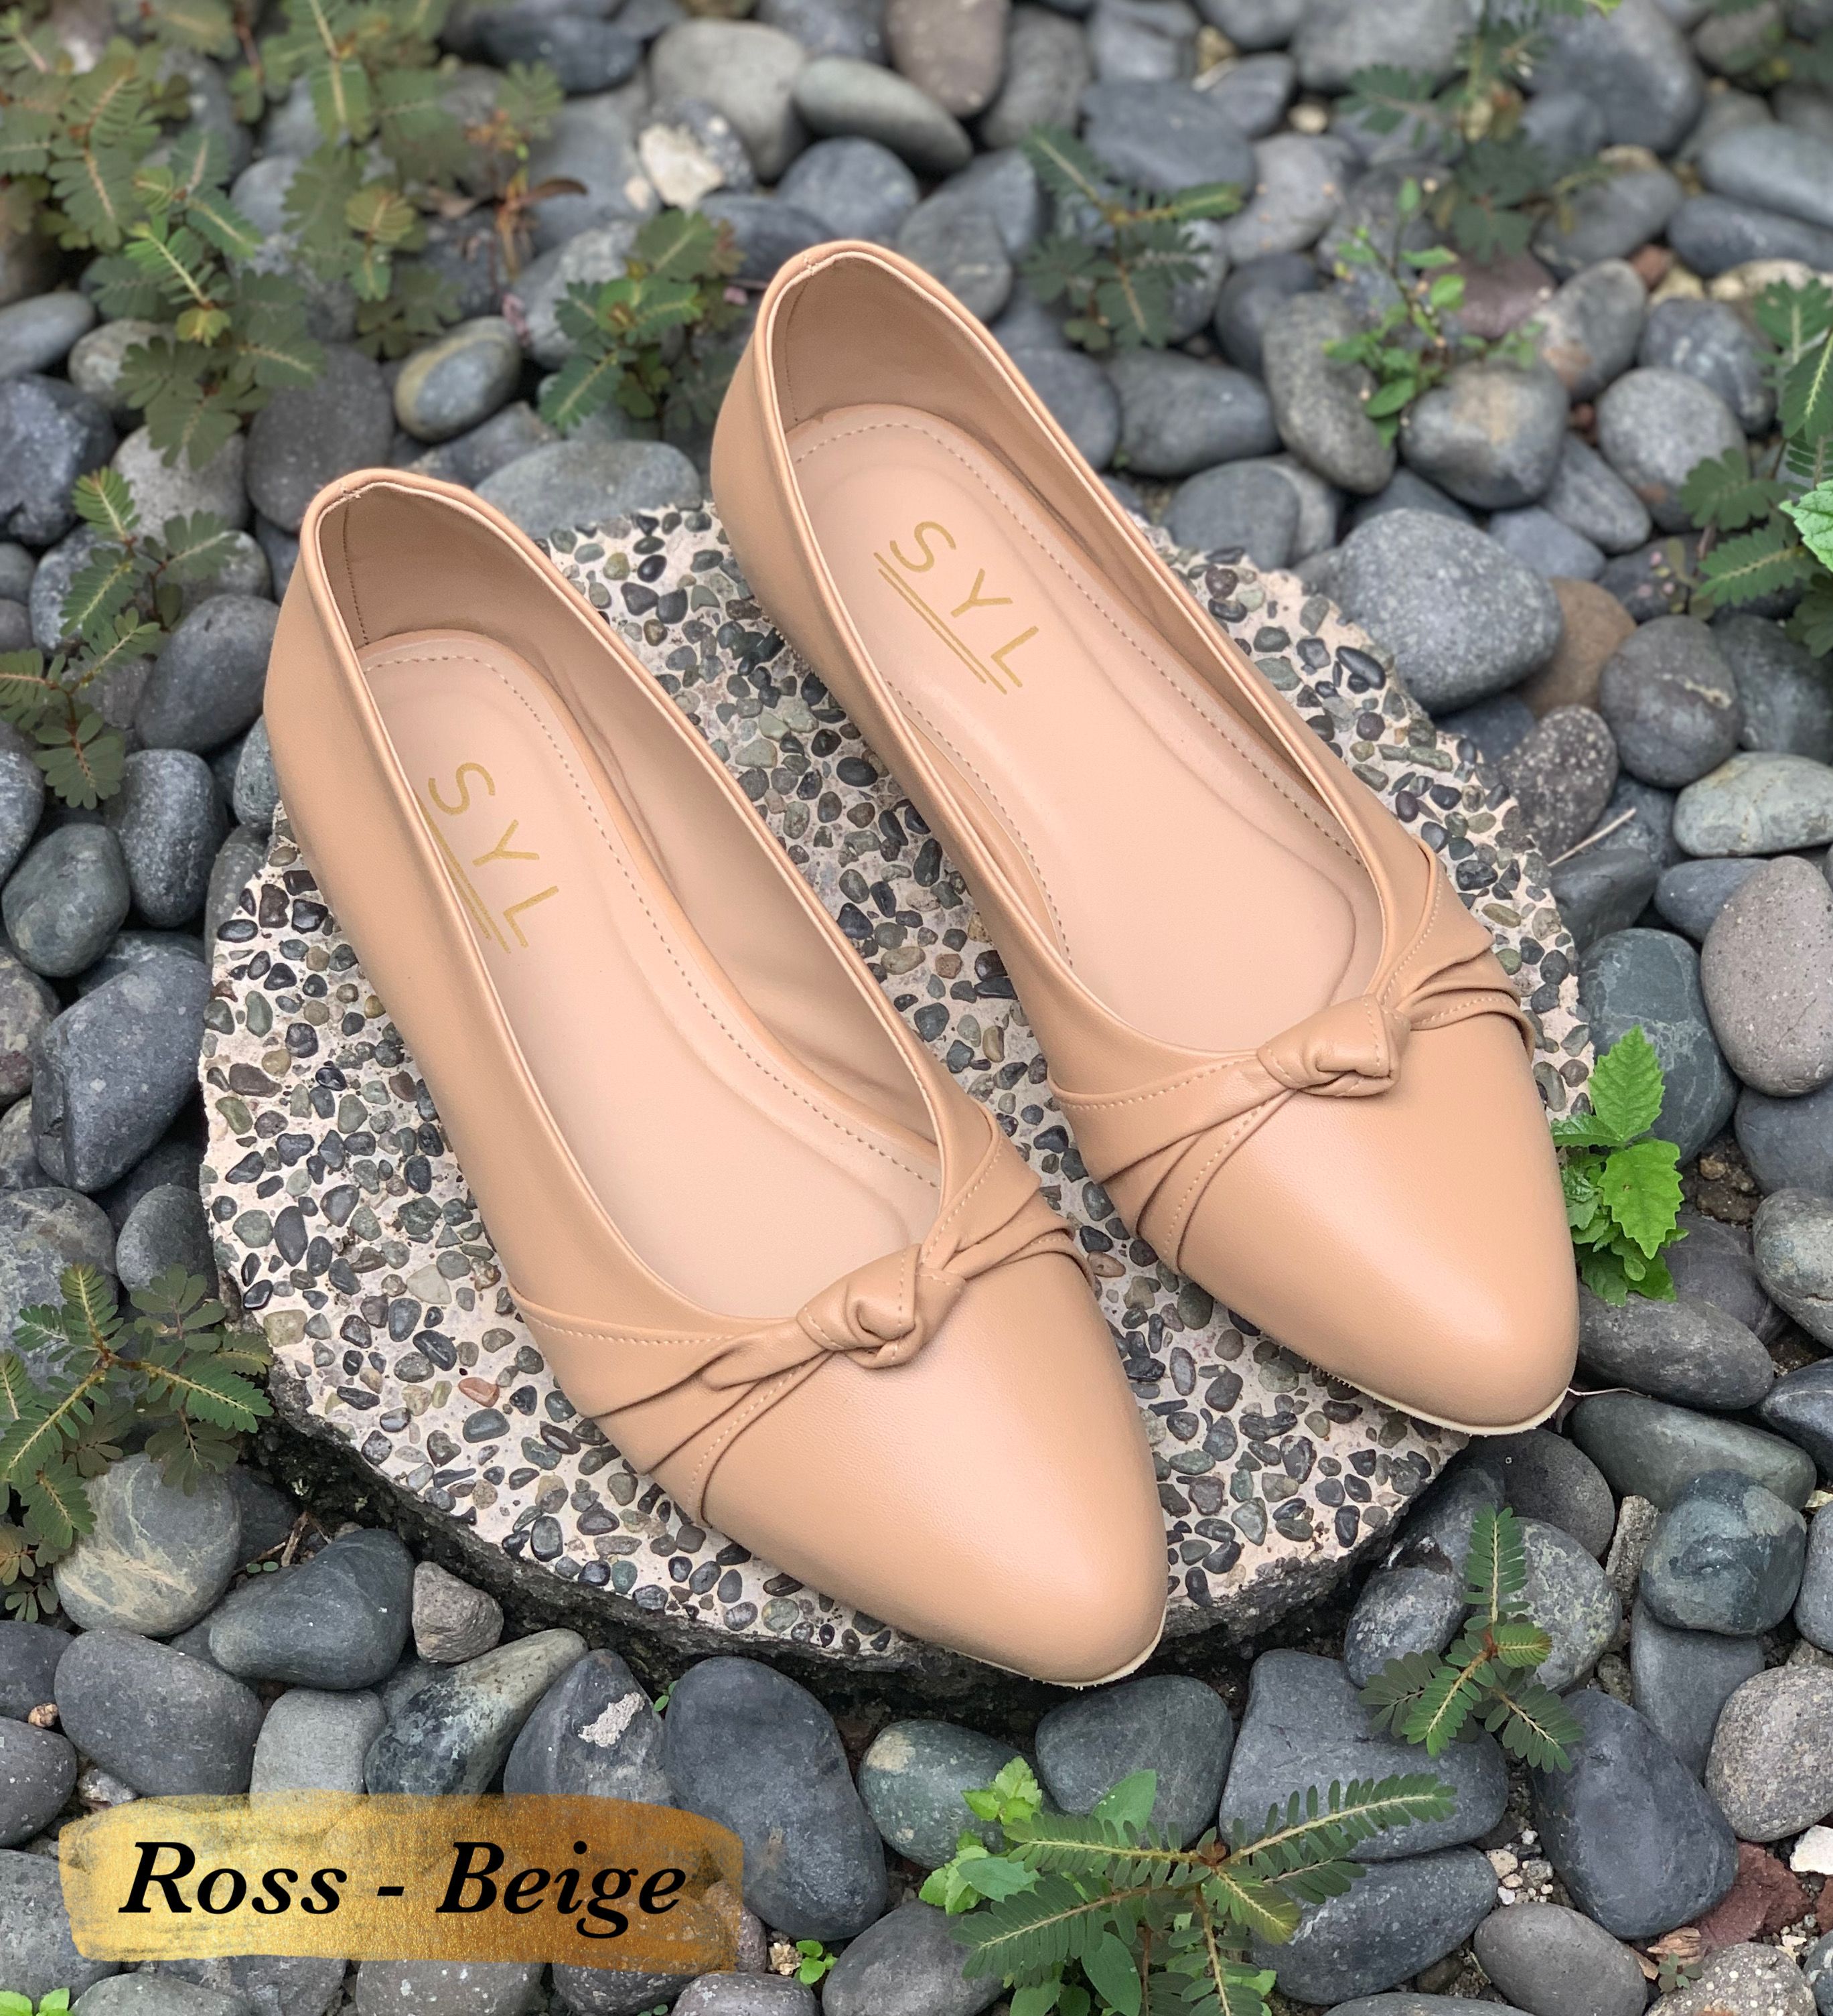 Ross shoes by SYL – SYL Footwear